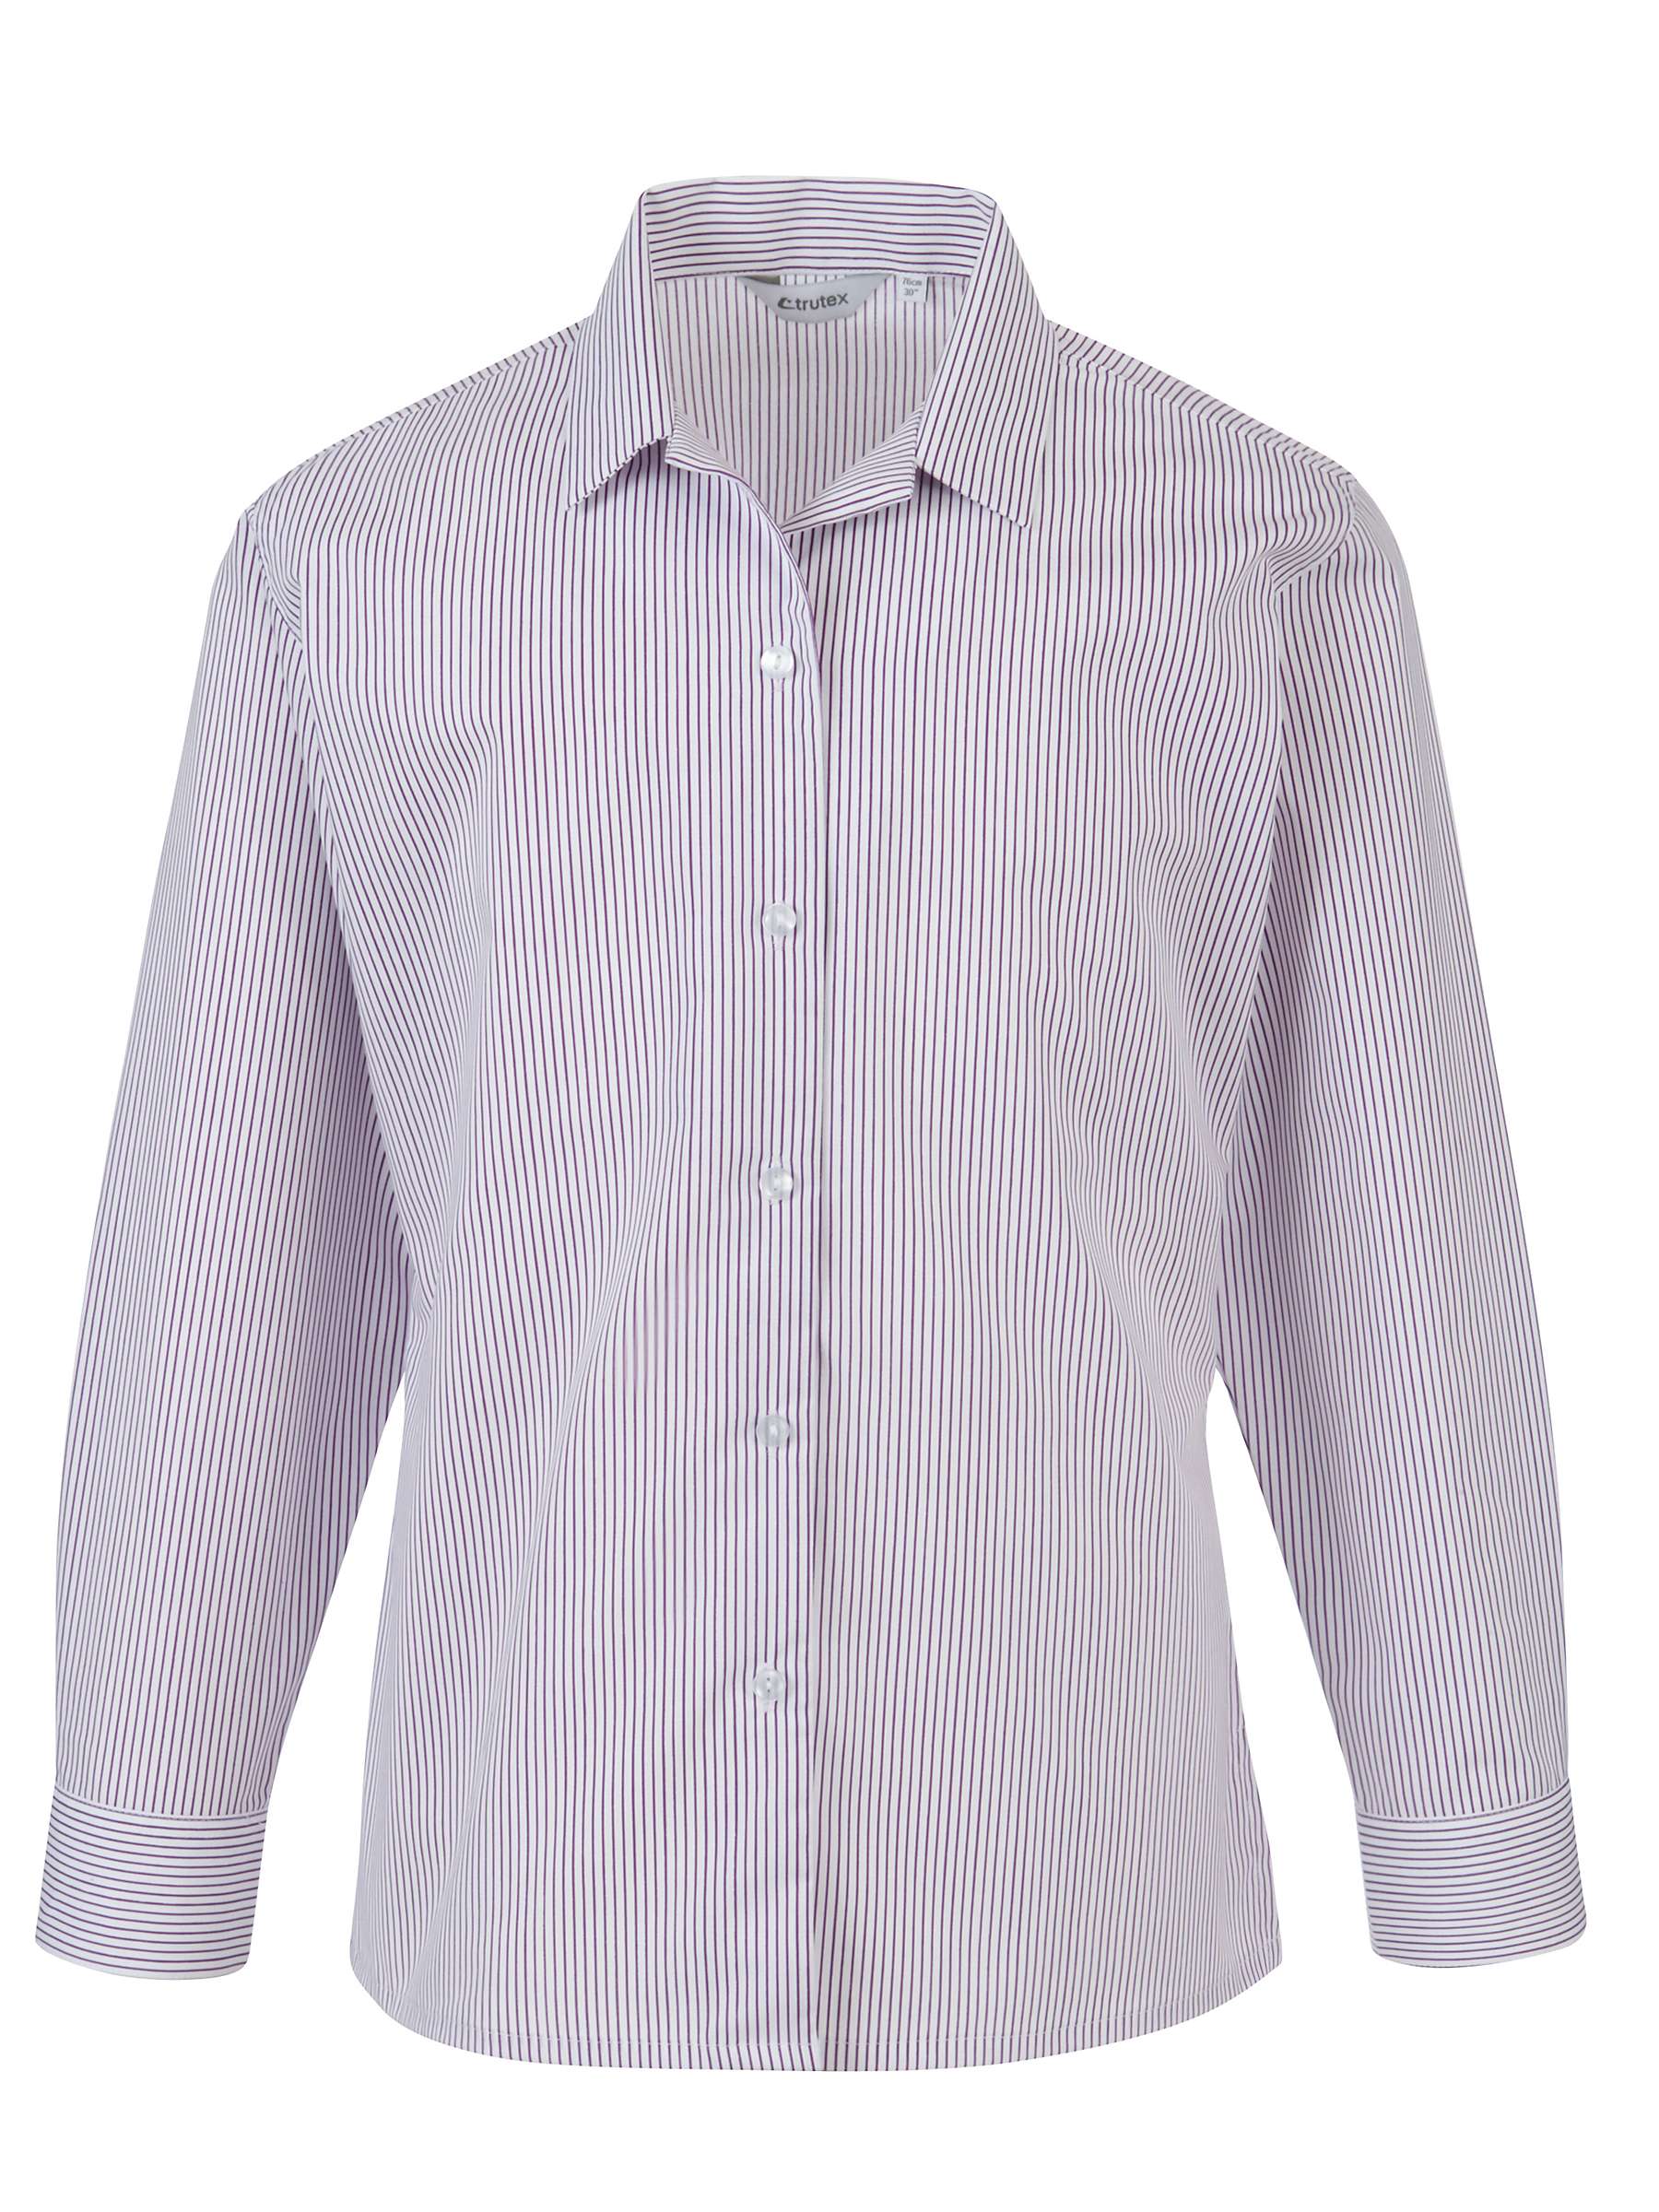 Buy The Perse Upper School Girls' Long Sleeved Revere Collar Blouse, Pack of 2, Purple Online at johnlewis.com